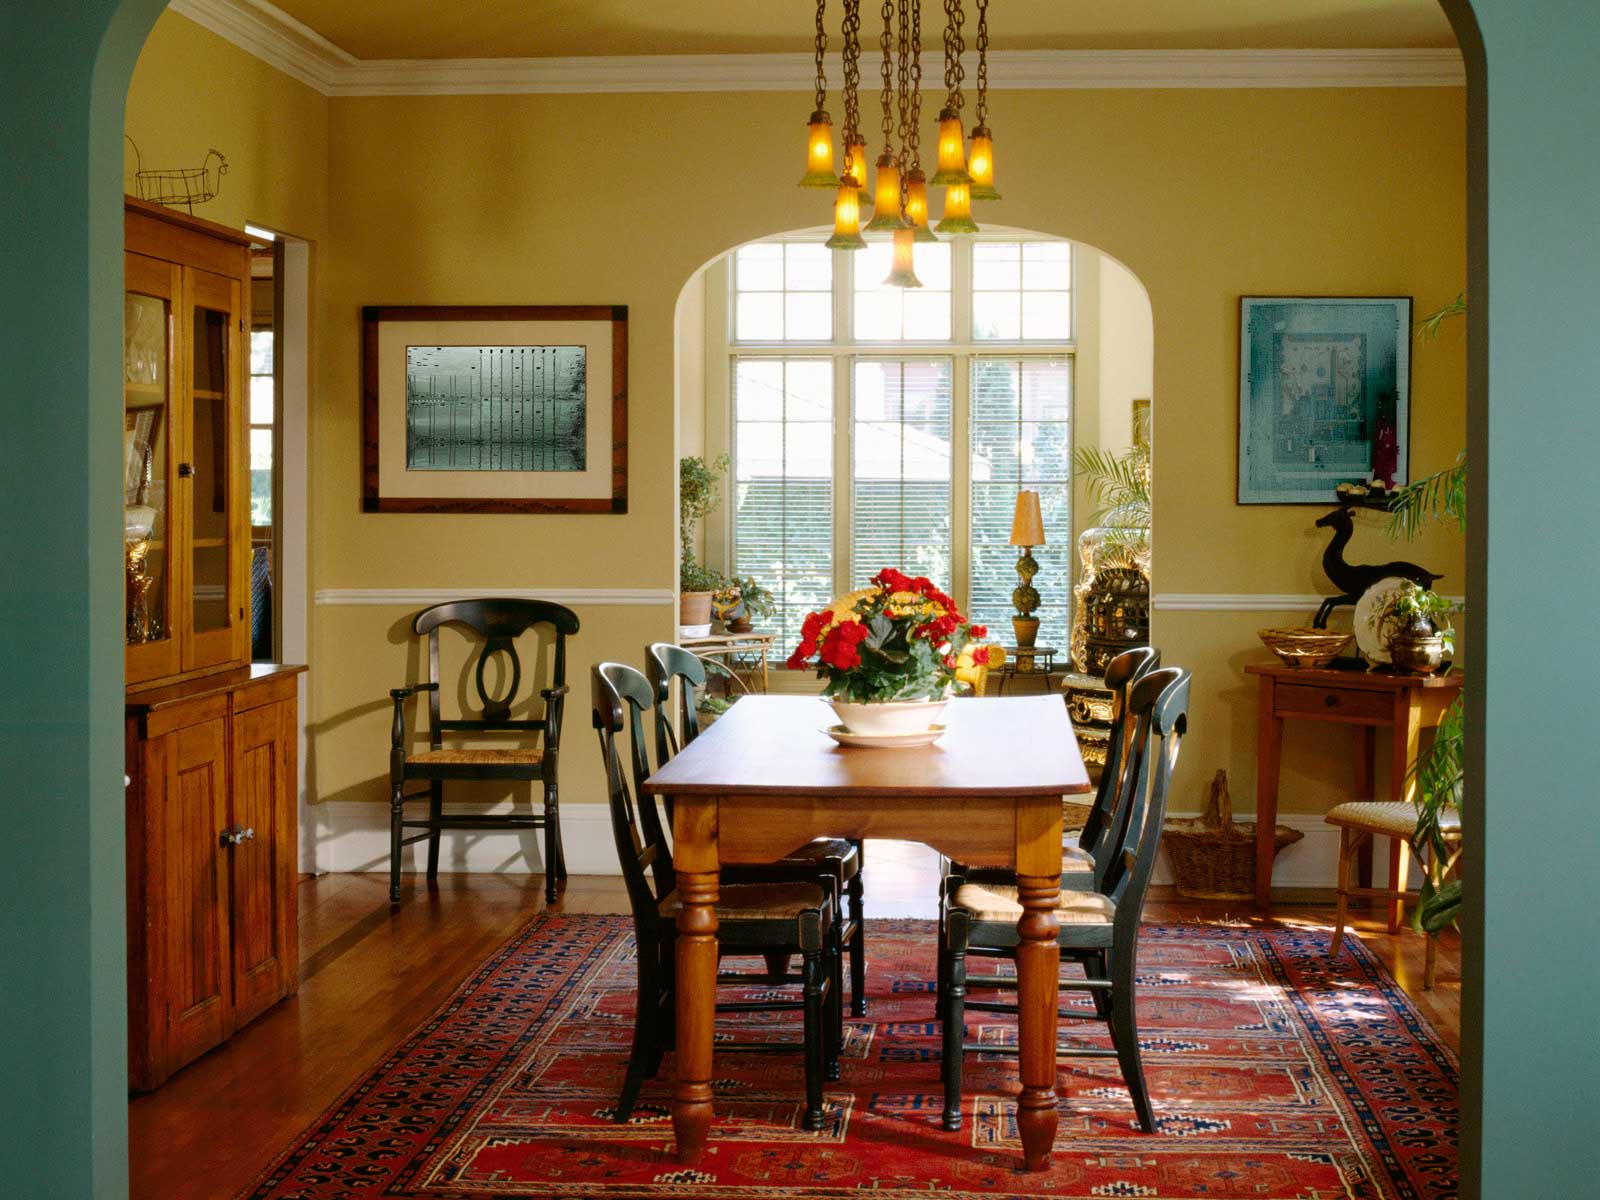 Dining Room Dining Traditional Dining Room With Wooden Dining Table And Vintage Red Carpet With Small Dining Room Chandeliers Ideas Dining Room Romantic Dining Room Chandeliers To Inspire Your Dining Rooms